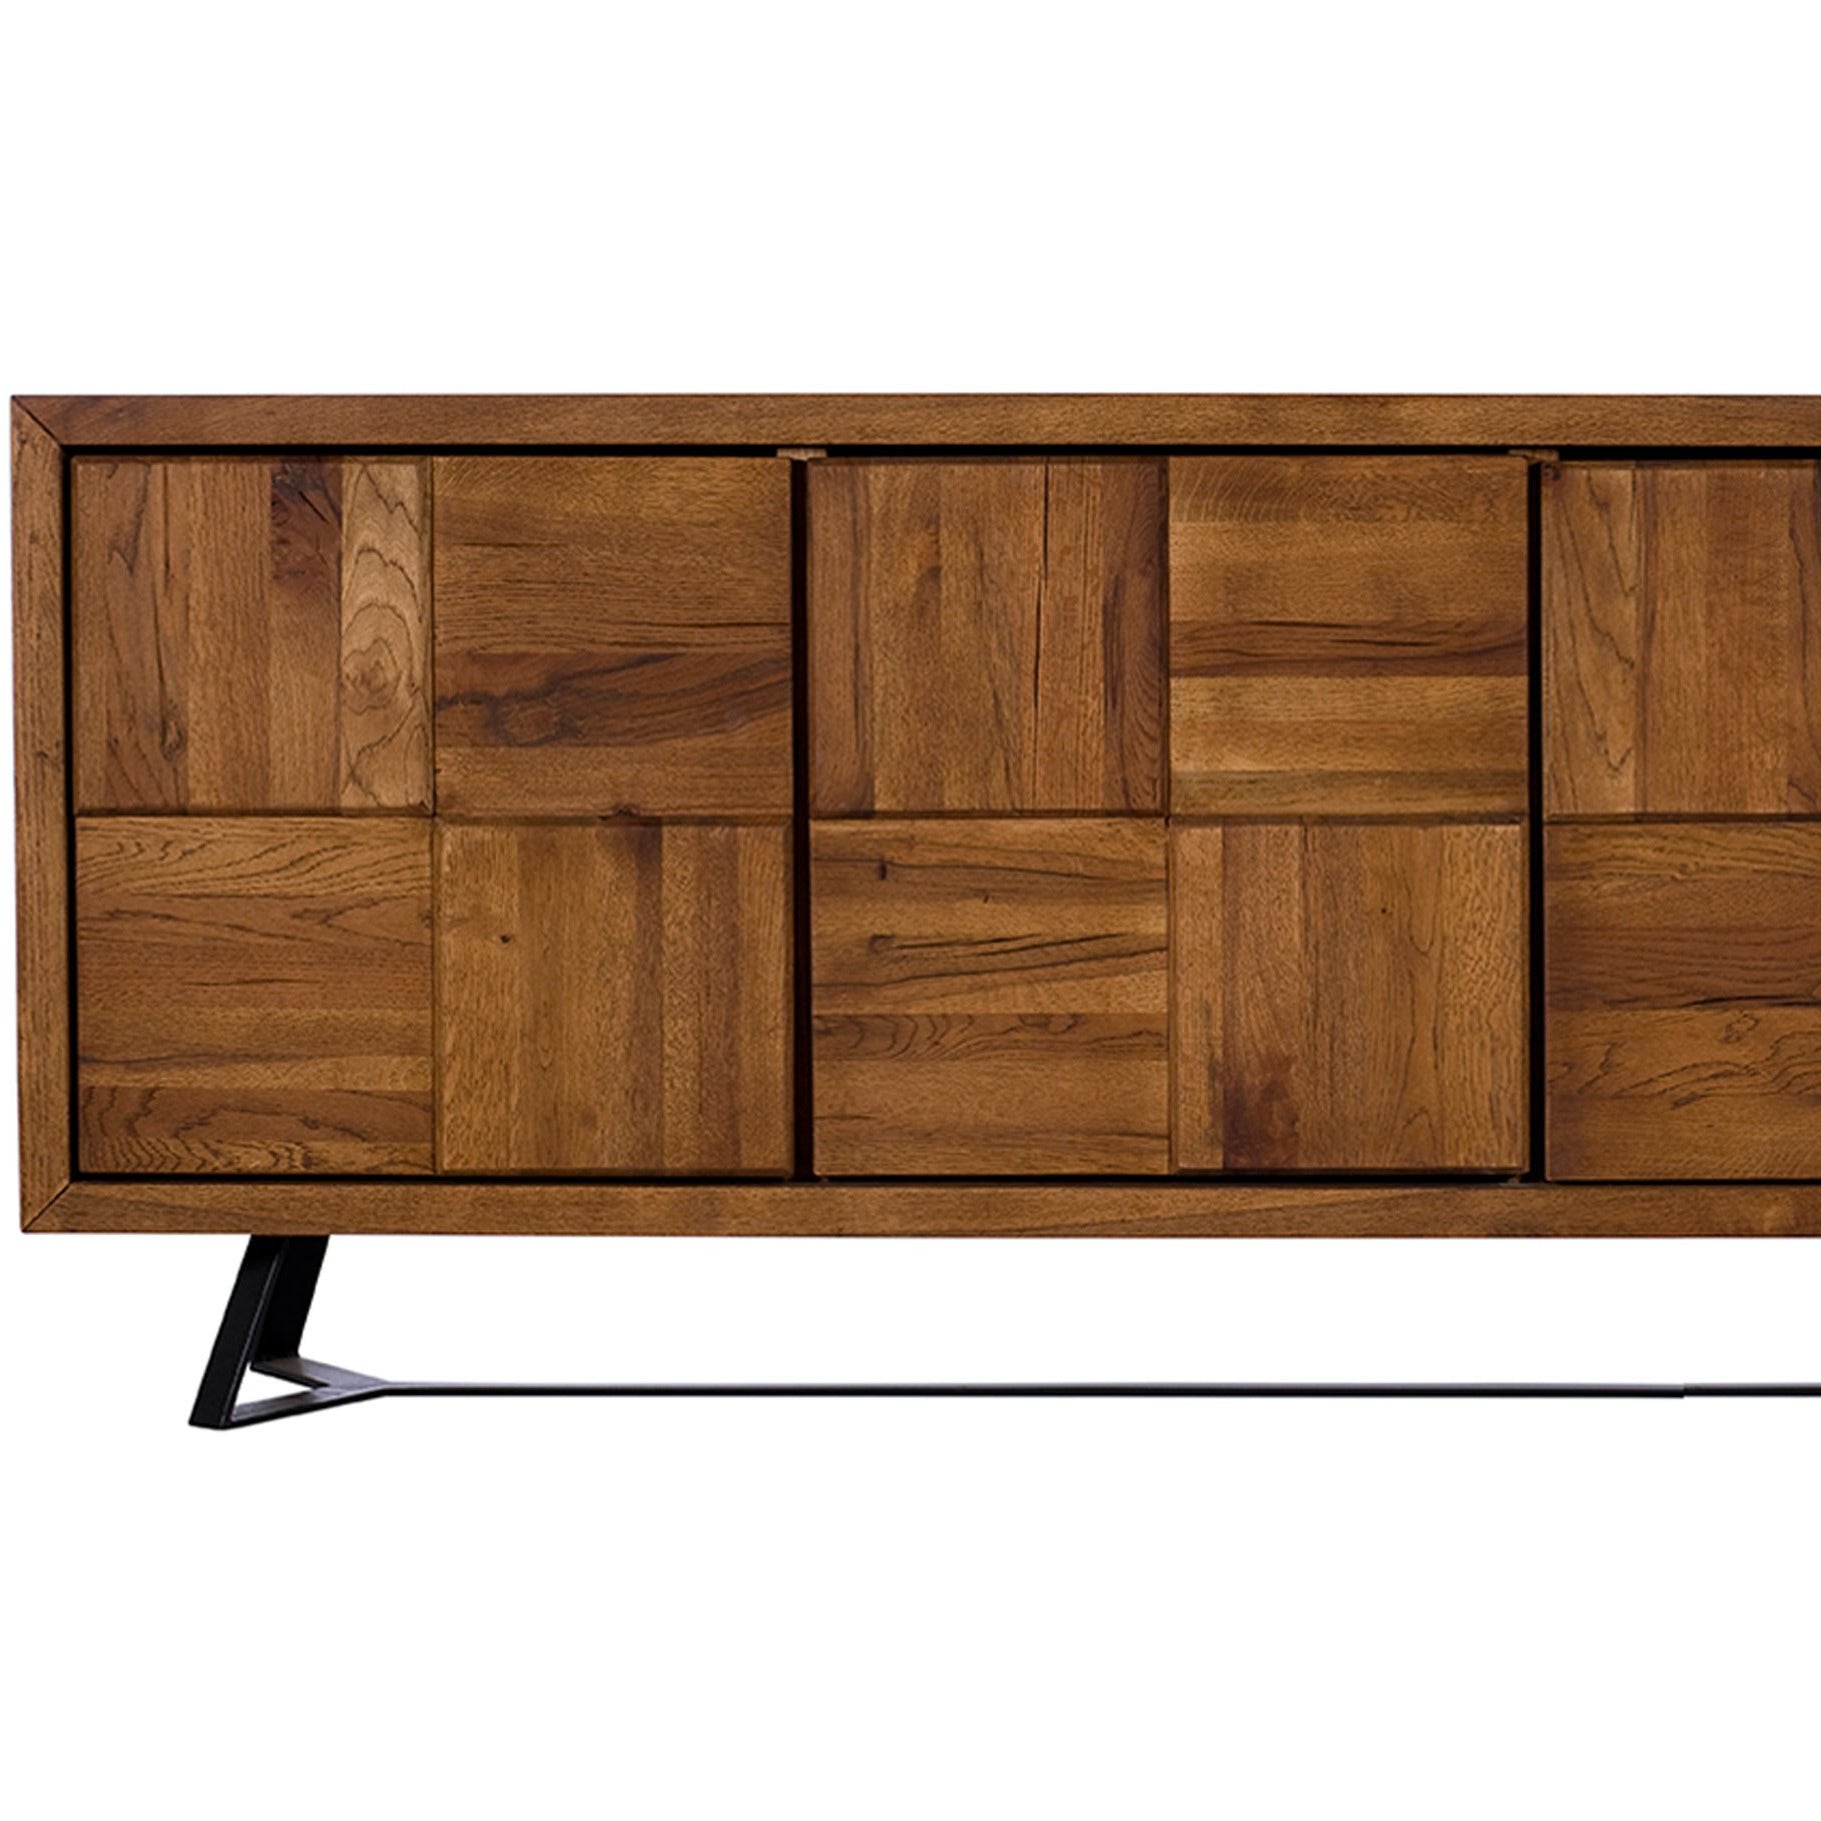 Soho Camden Extra Wide Sideboard from Upstairs Downstairs Furniture in Lisburn, Monaghan and Enniskillen